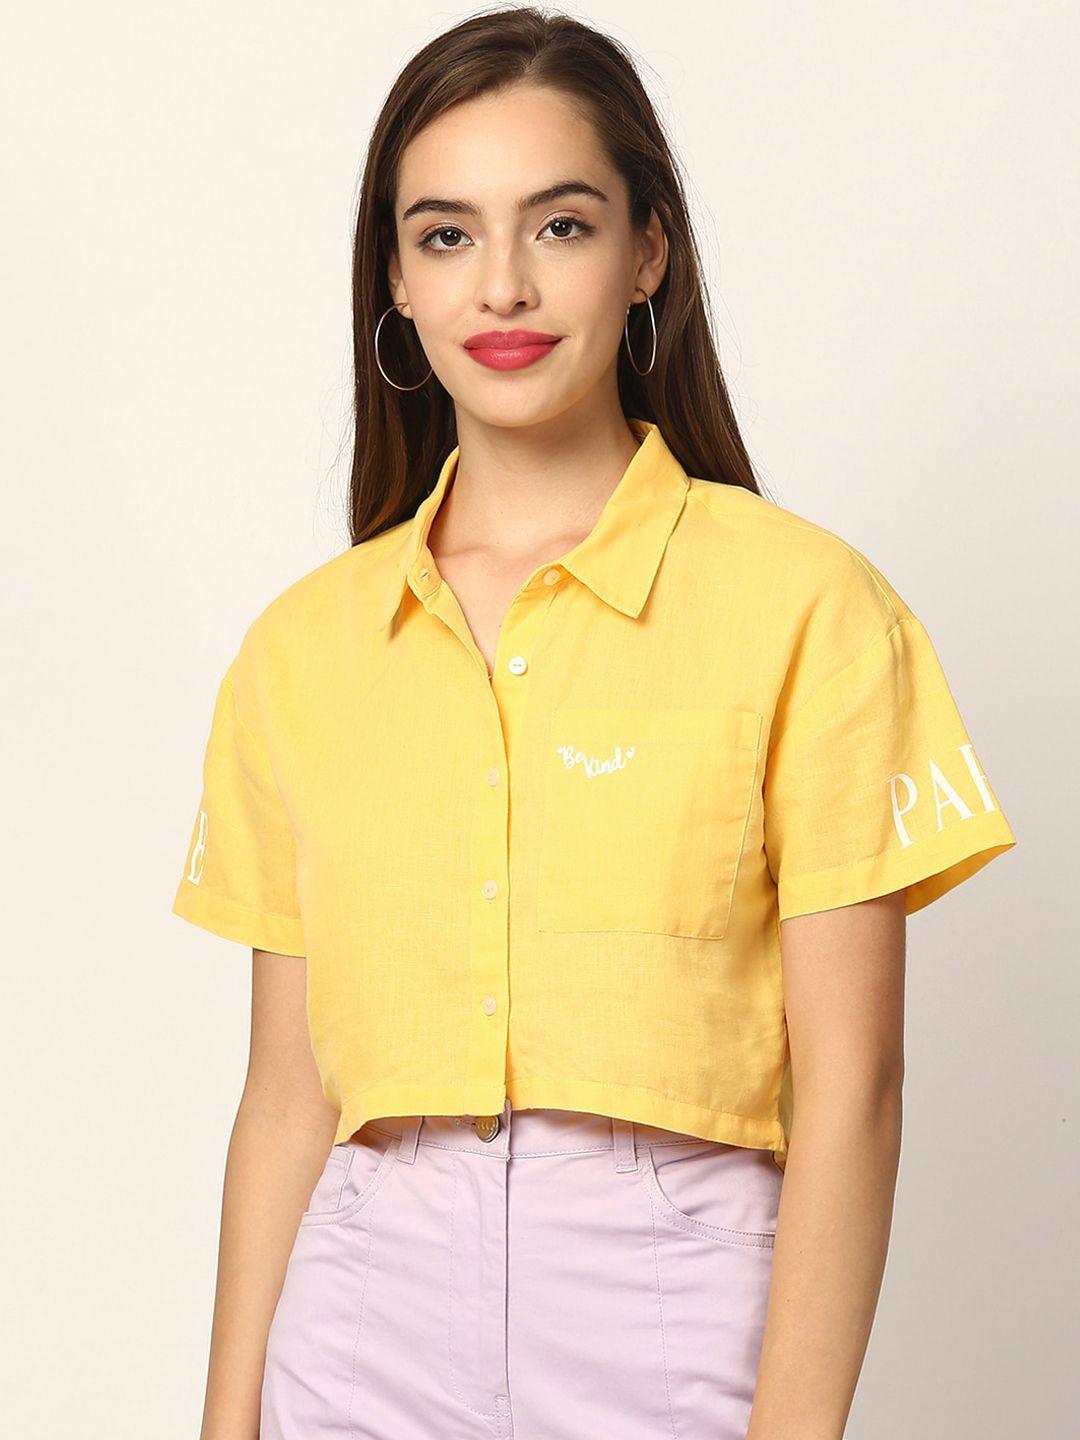 elle yellow shirt style crop top